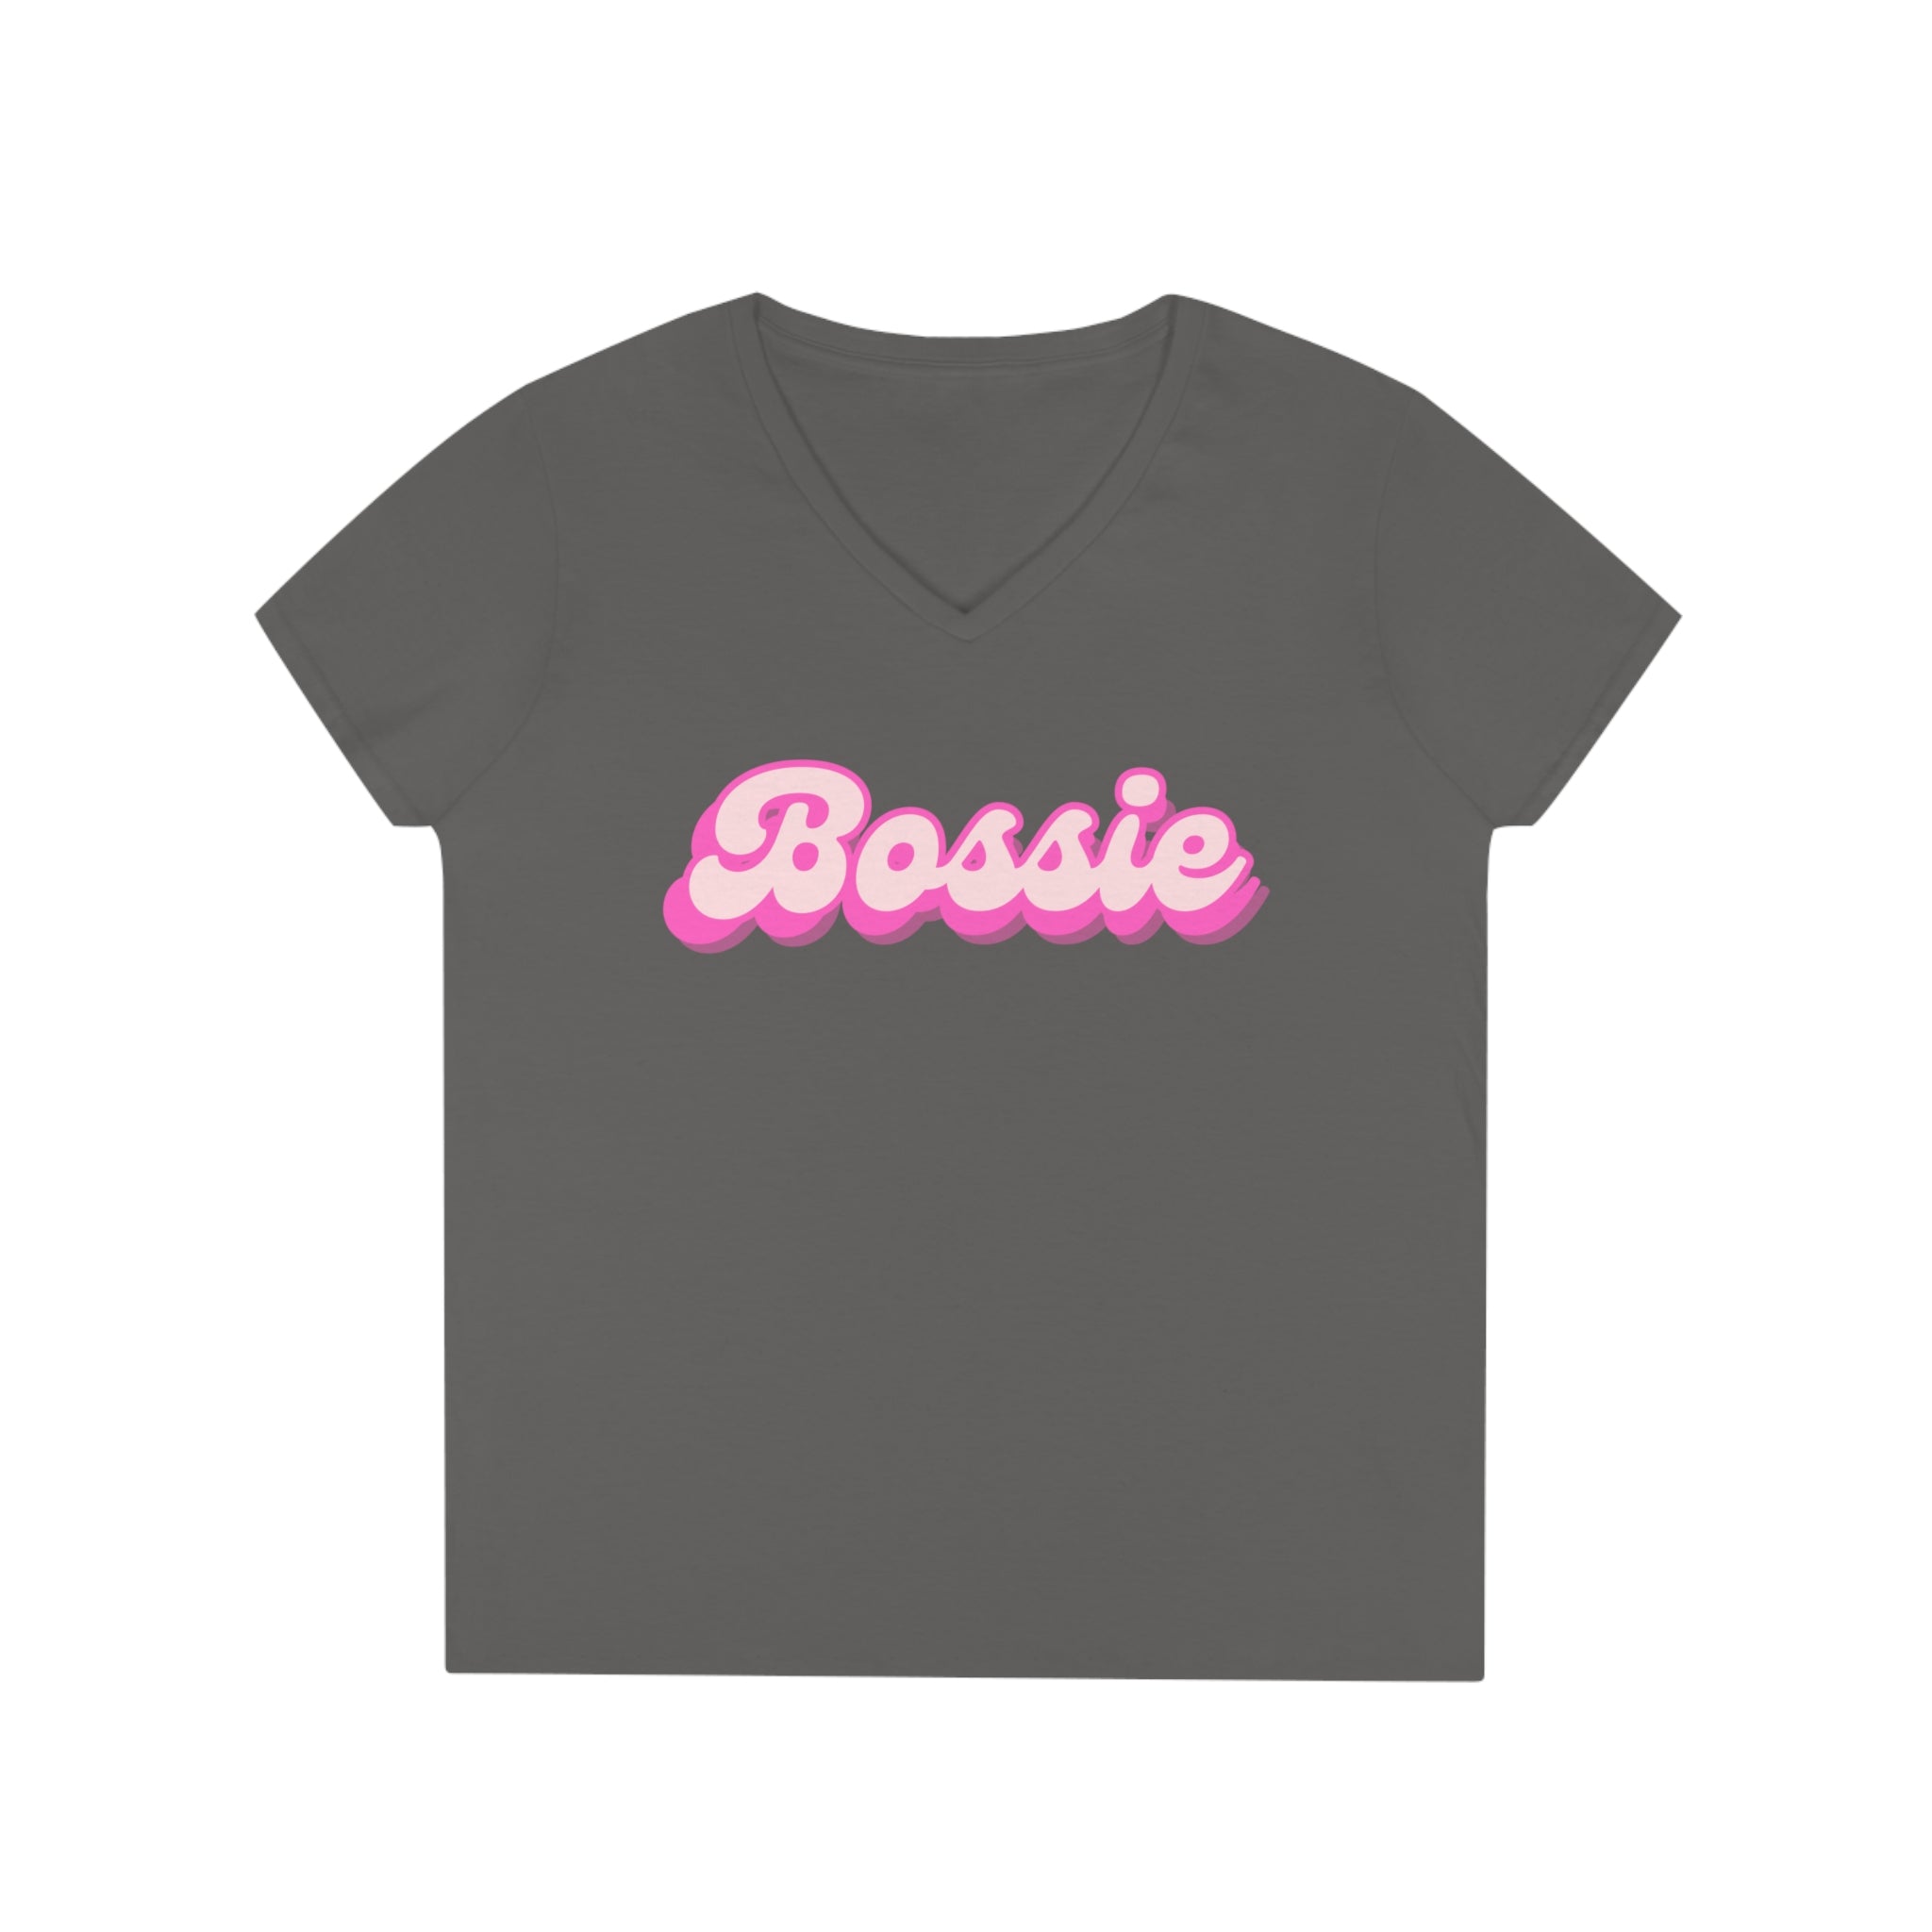  Bossie (Barbie) Funny Women's V Neck T-shirt, Cute Graphic Tee V-neck2XLCharcoal